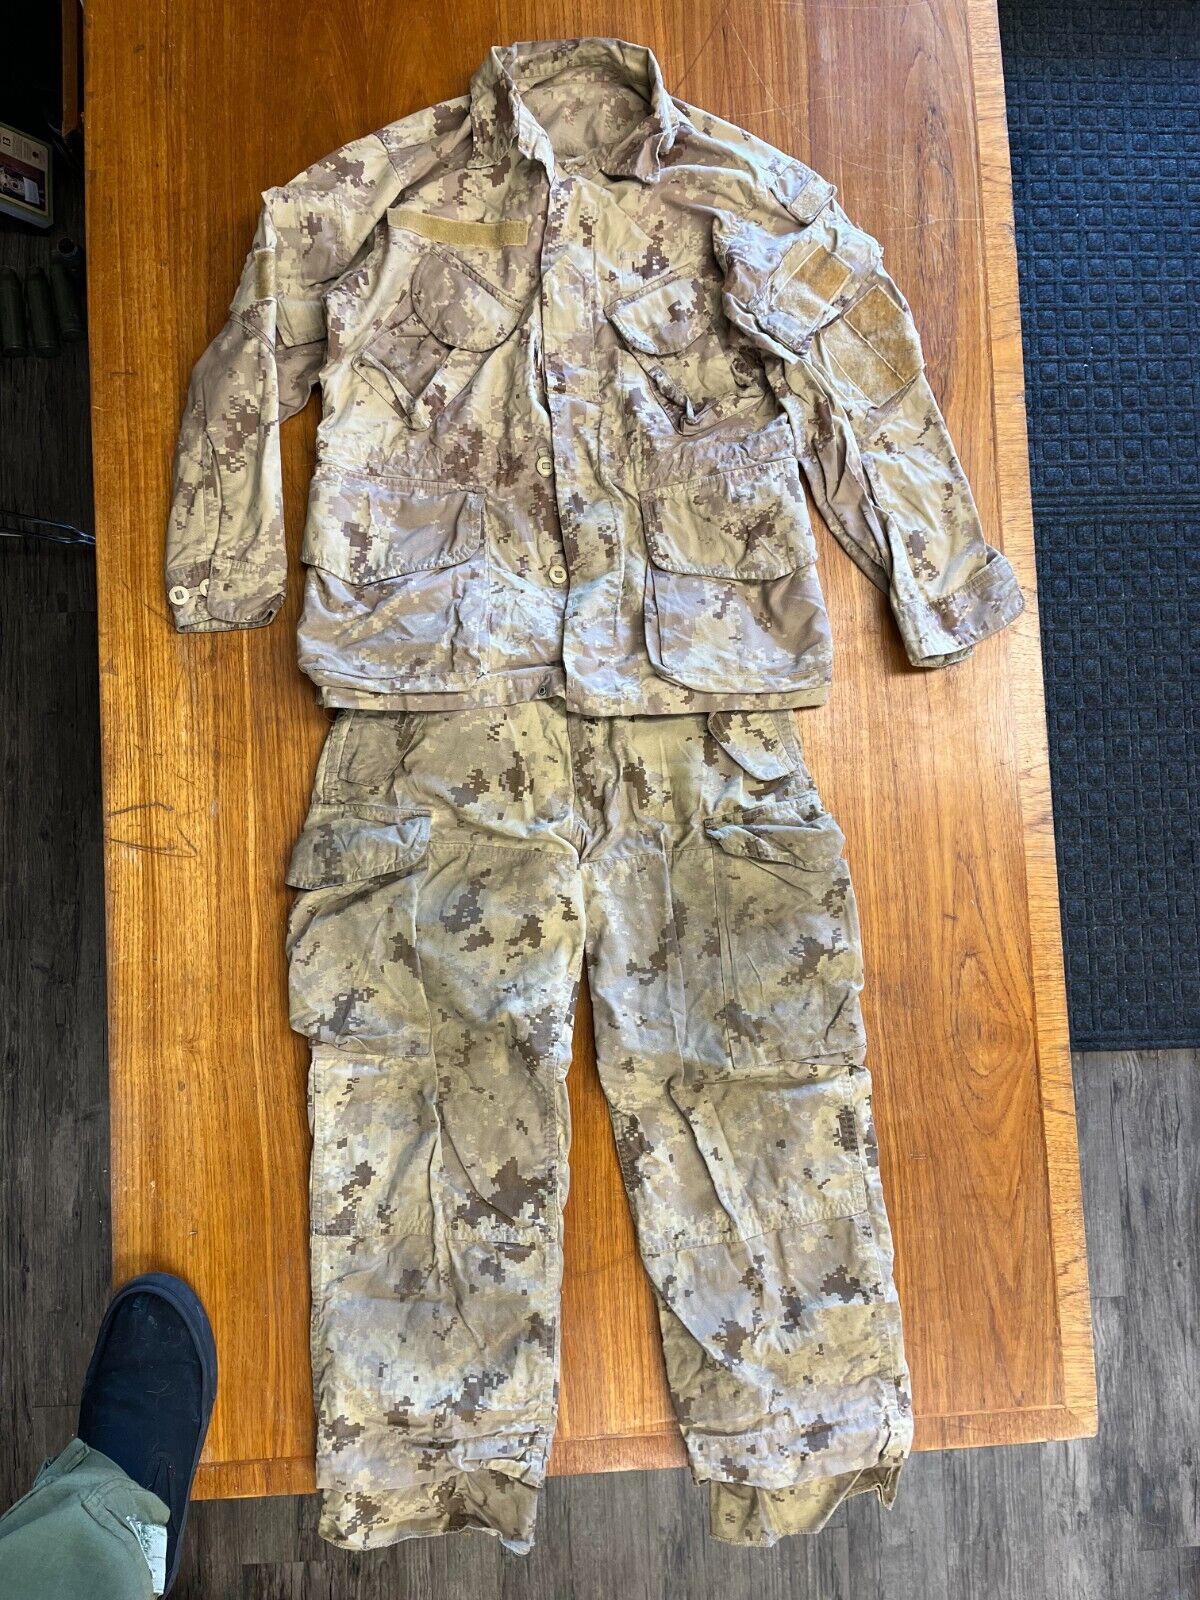 Canadian Armed Forces CADPAT Arid Afghanistan Issued COMBAT USED Shirt & Pants